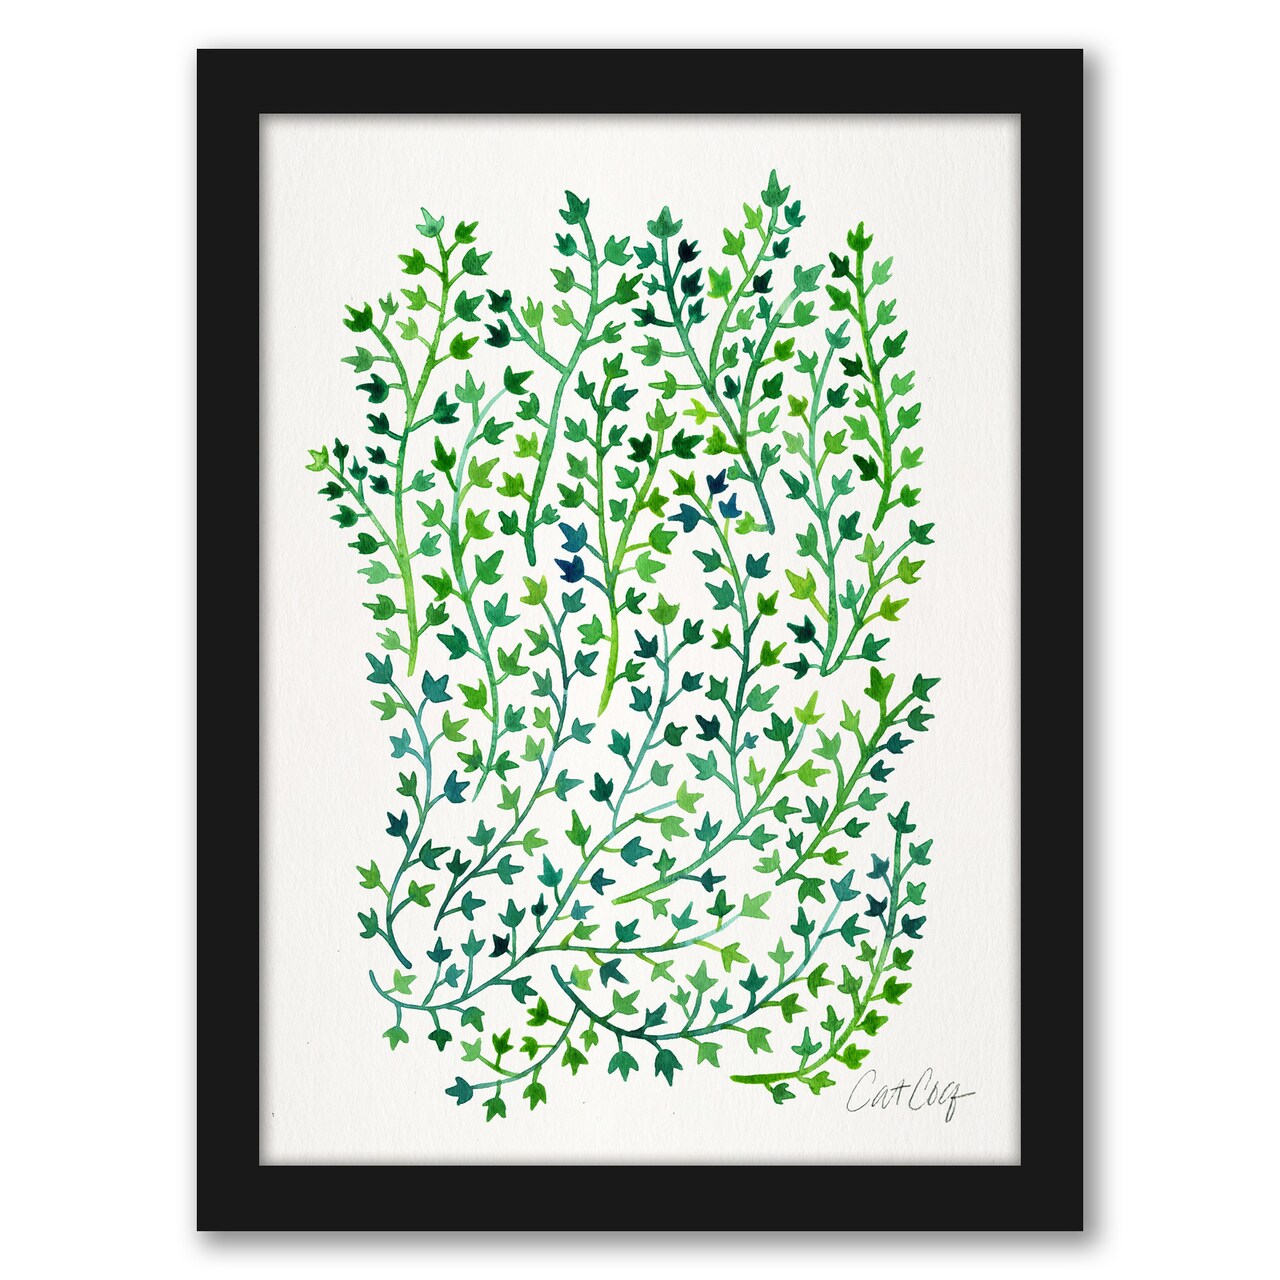 Greenivy by Cat Coquillette Frame  - Americanflat